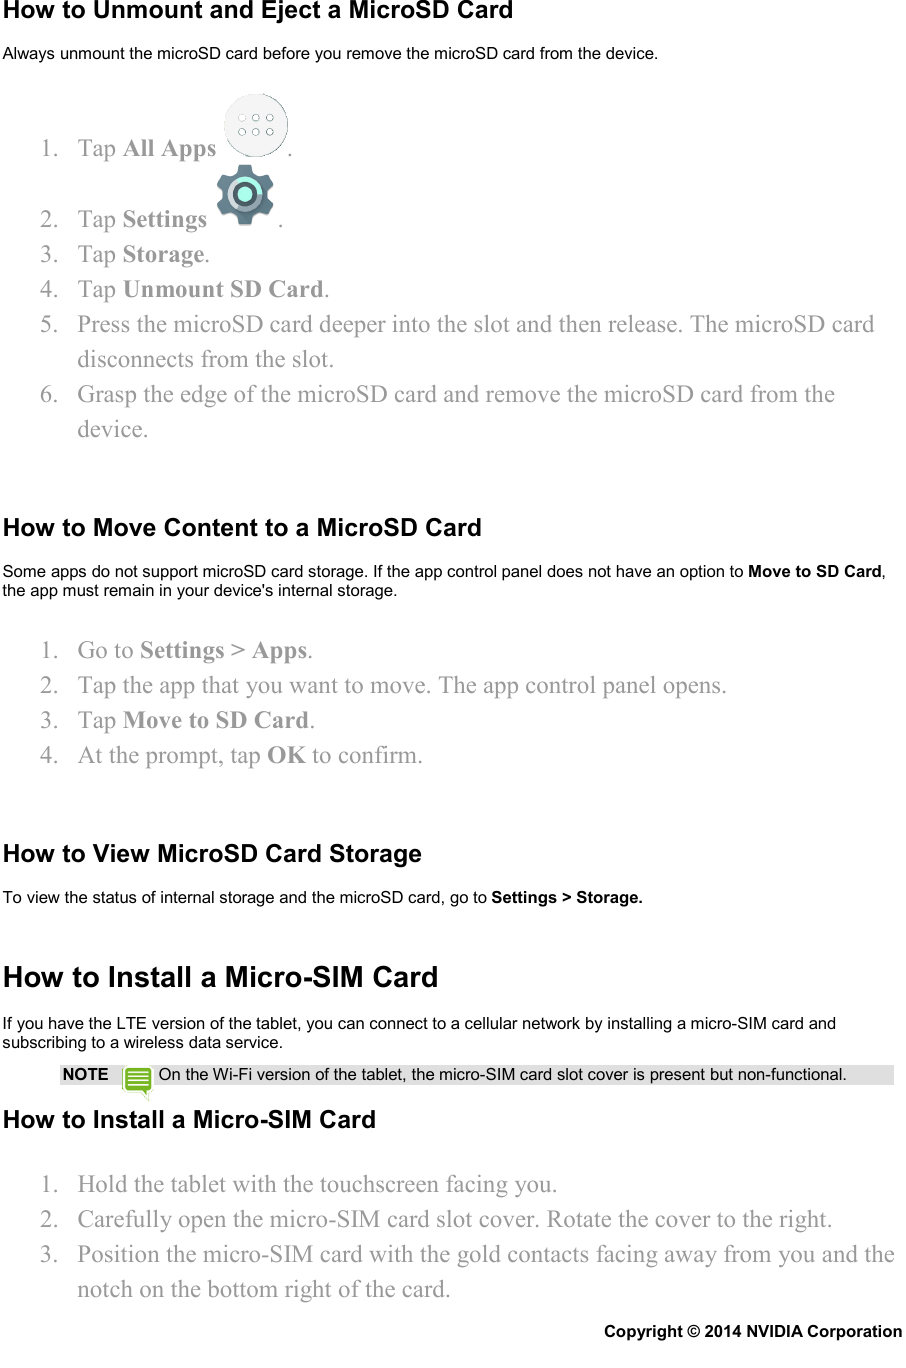 How to Unmount and Eject a MicroSD Card Always unmount the microSD card before you remove the microSD card from the device. 1. Tap All Apps  . 2. Tap Settings . 3. Tap Storage. 4. Tap Unmount SD Card. 5. Press the microSD card deeper into the slot and then release. The microSD card disconnects from the slot. 6. Grasp the edge of the microSD card and remove the microSD card from the device.   How to Move Content to a MicroSD Card Some apps do not support microSD card storage. If the app control panel does not have an option to Move to SD Card, the app must remain in your device&apos;s internal storage. 1. Go to Settings &gt; Apps. 2. Tap the app that you want to move. The app control panel opens. 3. Tap Move to SD Card. 4. At the prompt, tap OK to confirm.   How to View MicroSD Card Storage To view the status of internal storage and the microSD card, go to Settings &gt; Storage.   How to Install a Micro-SIM Card If you have the LTE version of the tablet, you can connect to a cellular network by installing a micro-SIM card and subscribing to a wireless data service. NOTE   On the Wi-Fi version of the tablet, the micro-SIM card slot cover is present but non-functional. How to Install a Micro-SIM Card 1. Hold the tablet with the touchscreen facing you. 2. Carefully open the micro-SIM card slot cover. Rotate the cover to the right. 3. Position the micro-SIM card with the gold contacts facing away from you and the notch on the bottom right of the card. Copyright © 2014 NVIDIA Corporation   